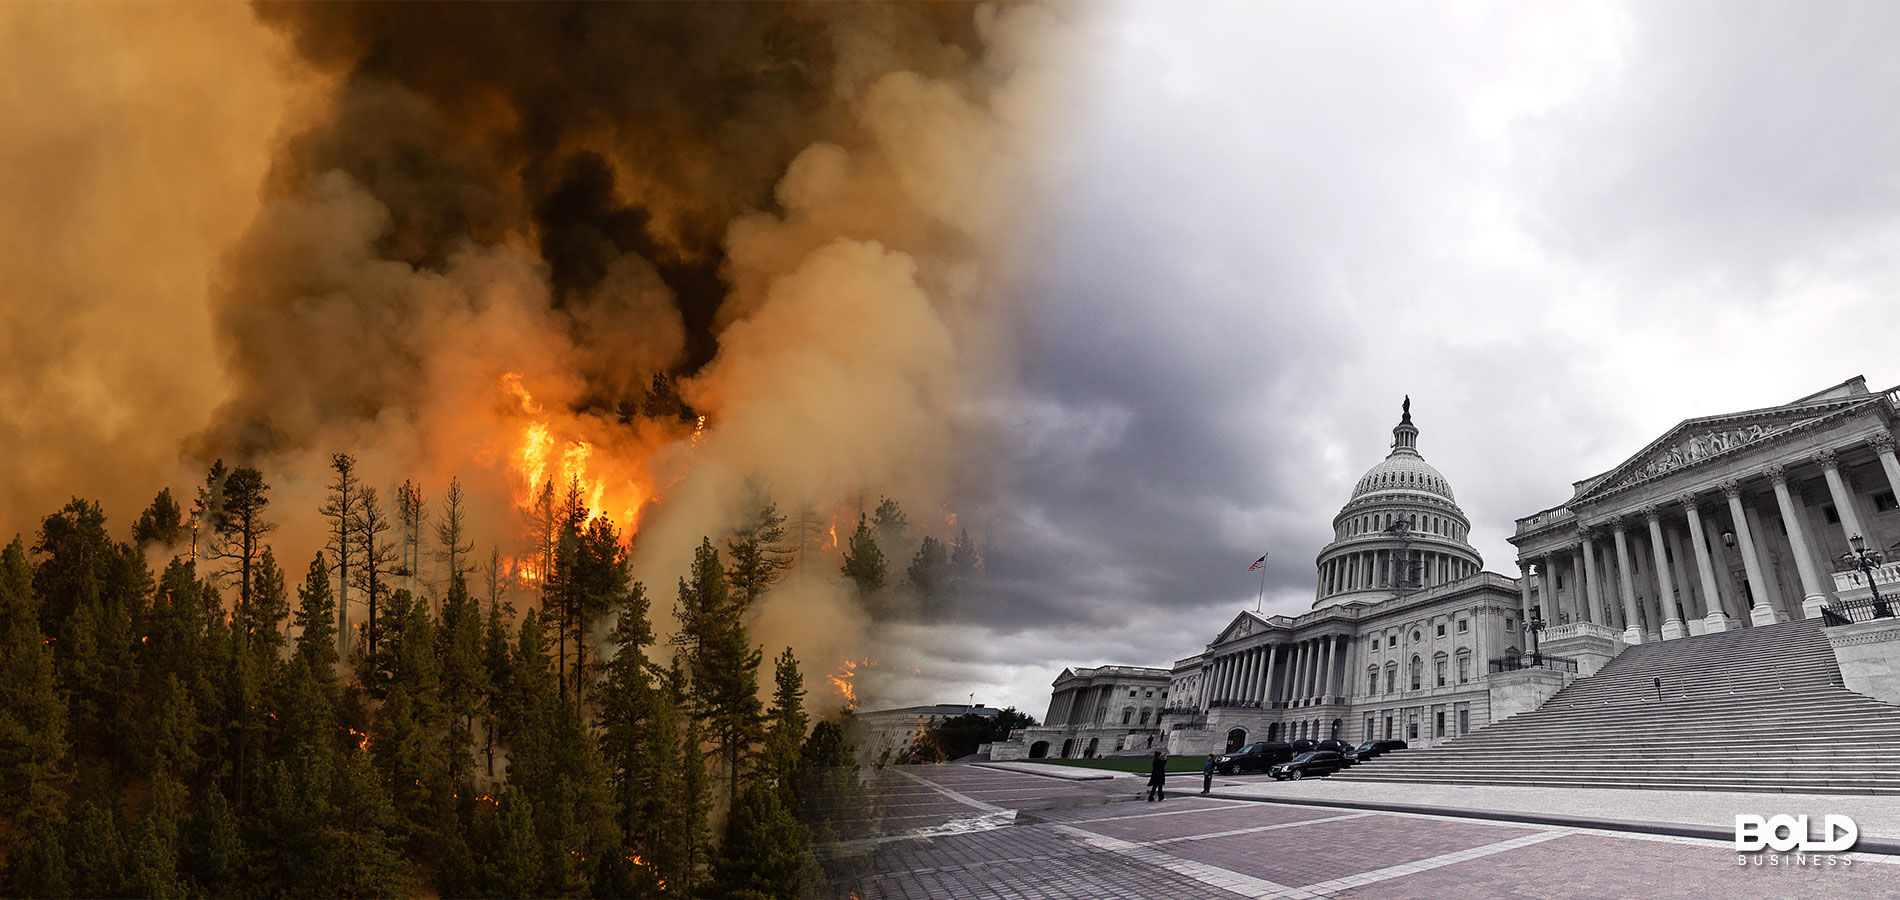 A wildfire and a government building